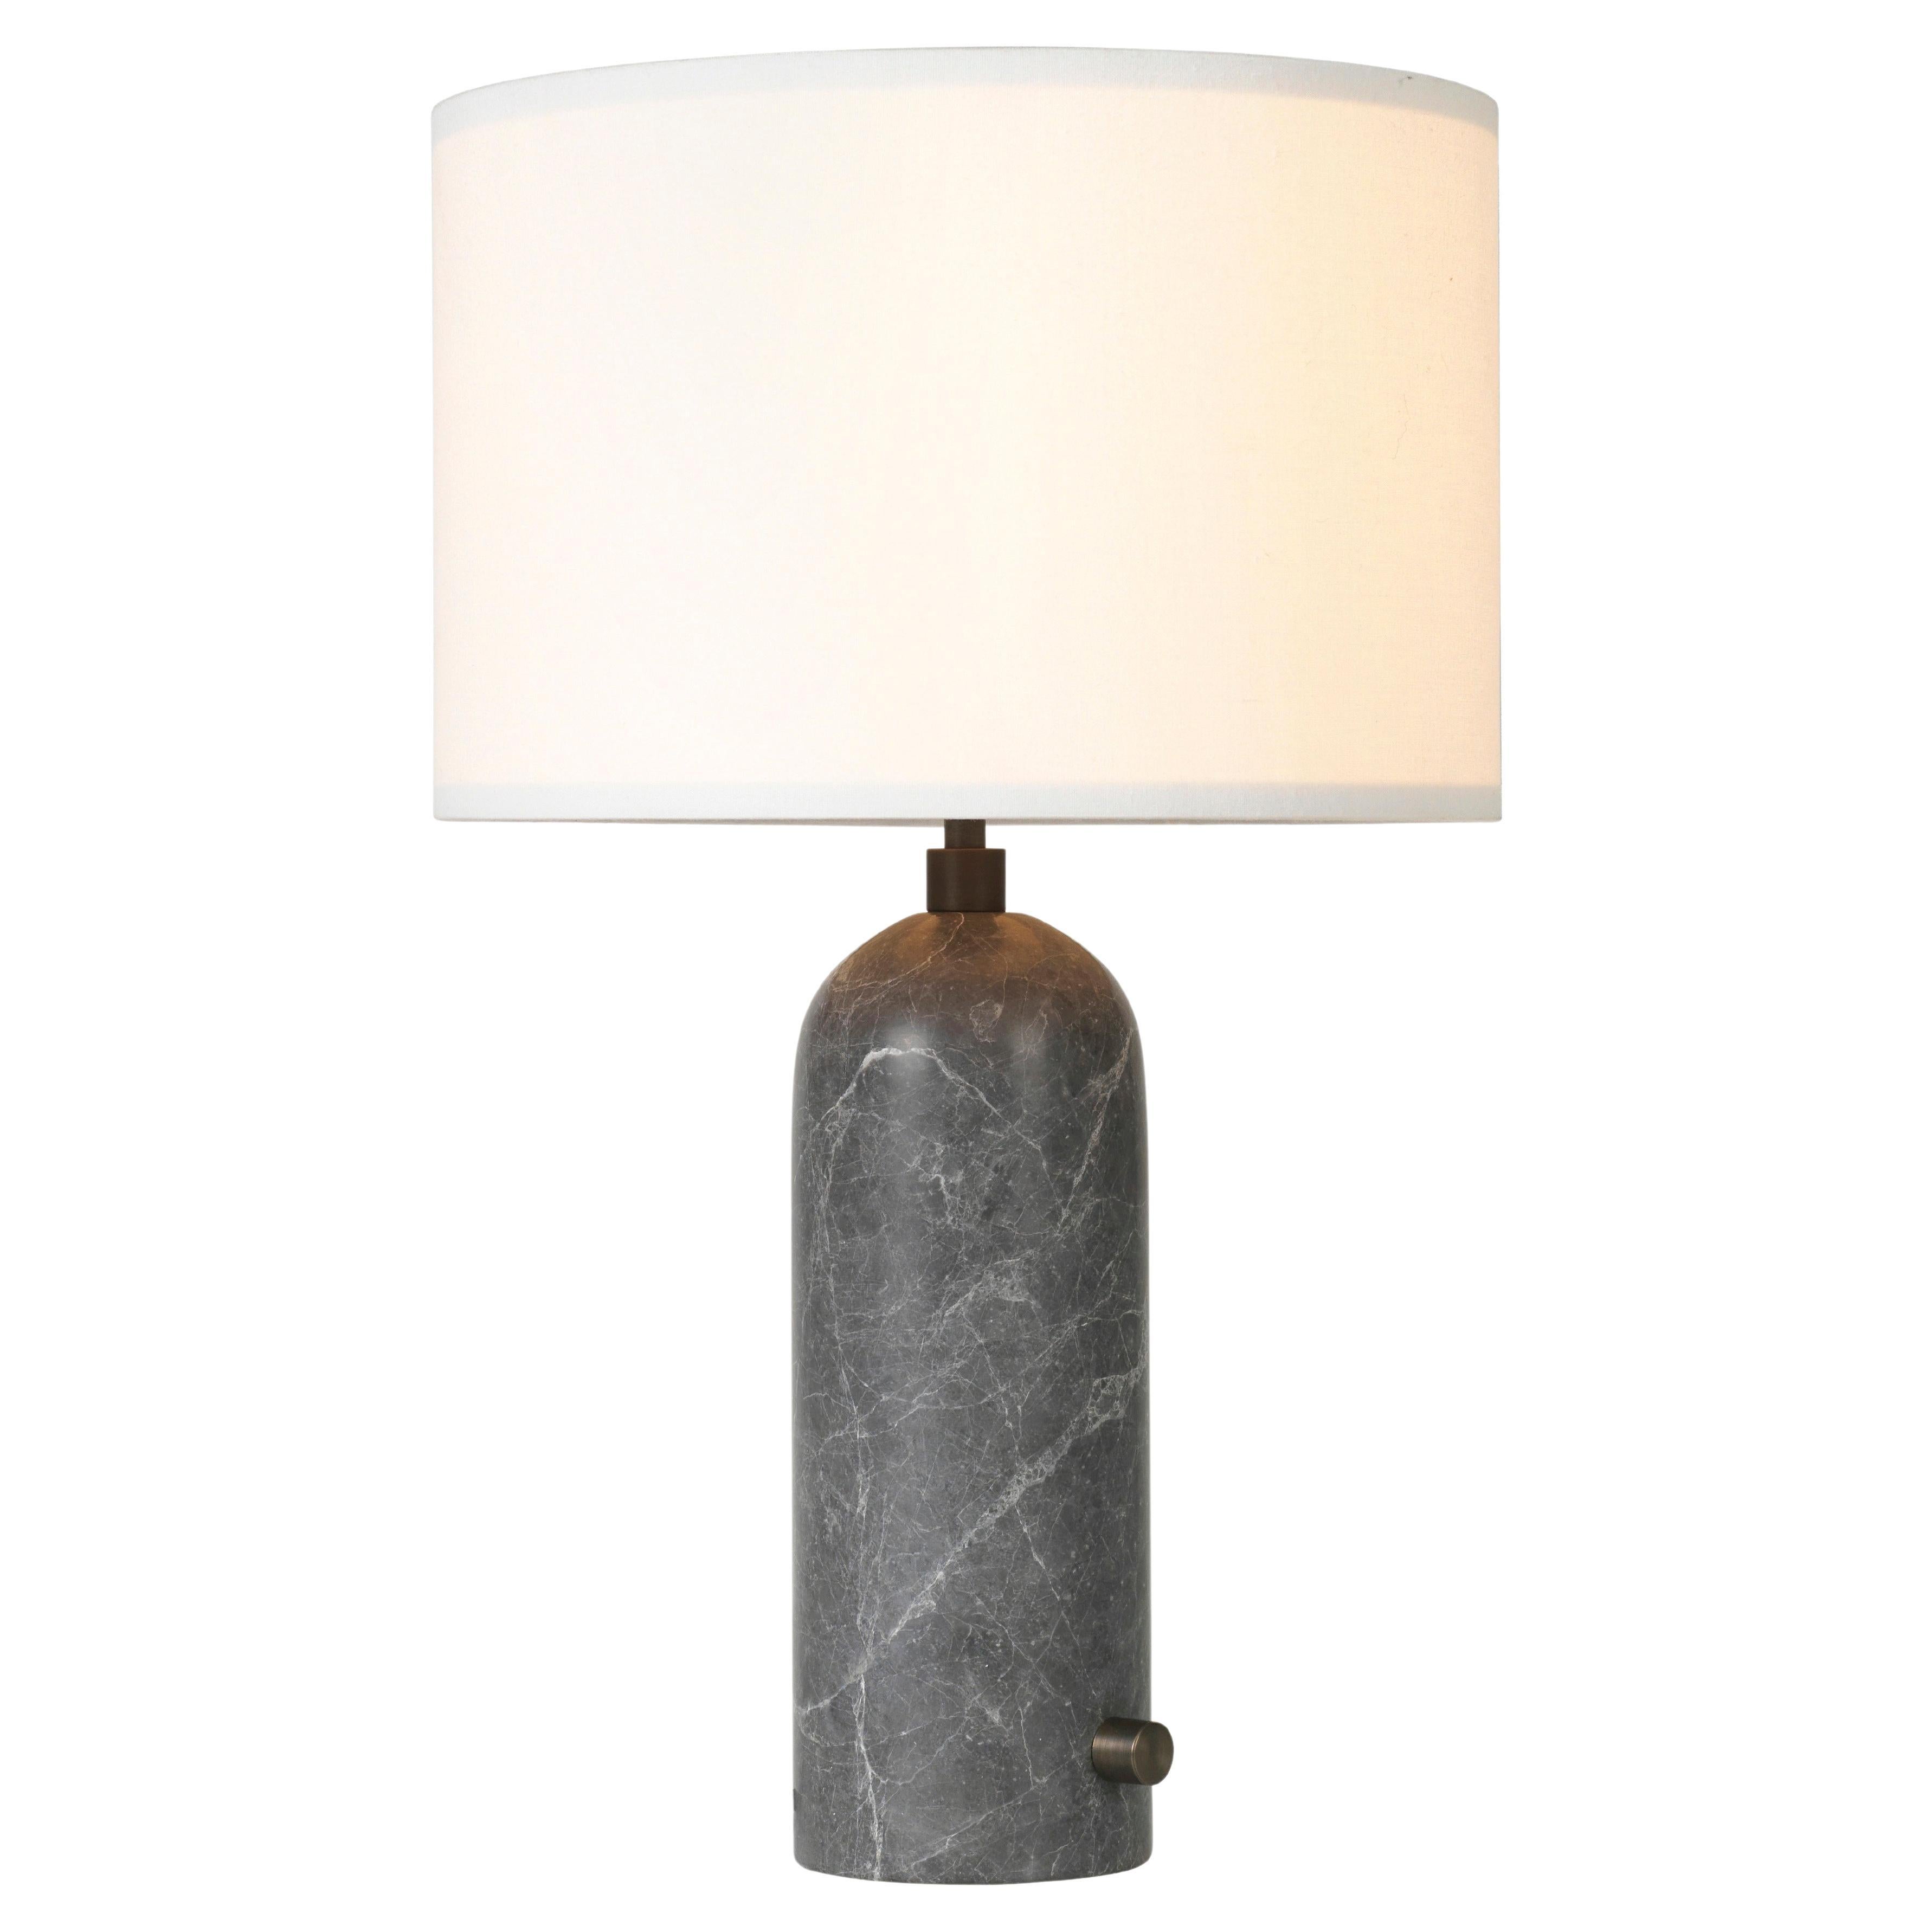 Small 'Gravity' Marble Table Lamp by Space Copenhagen for Gubi in Grey